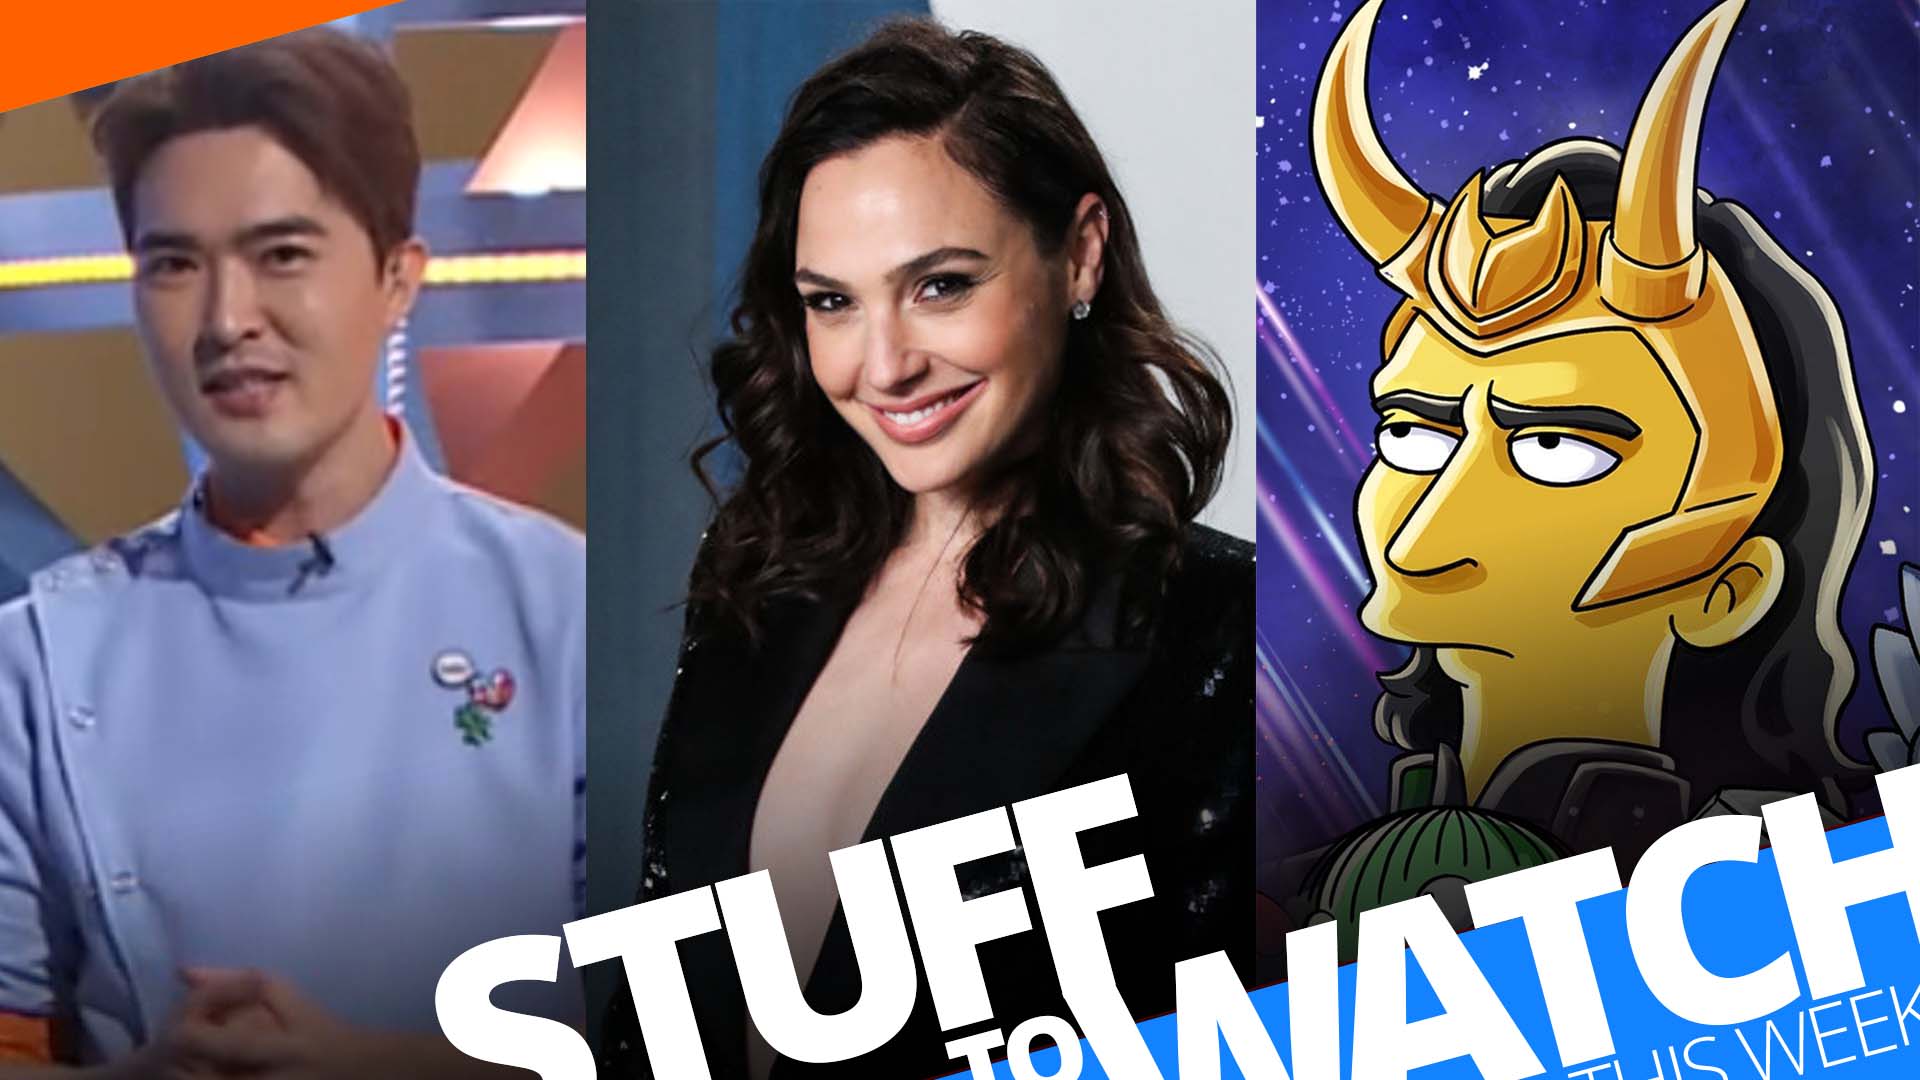 Stuff To Watch This Week (July 5-11, 2021)